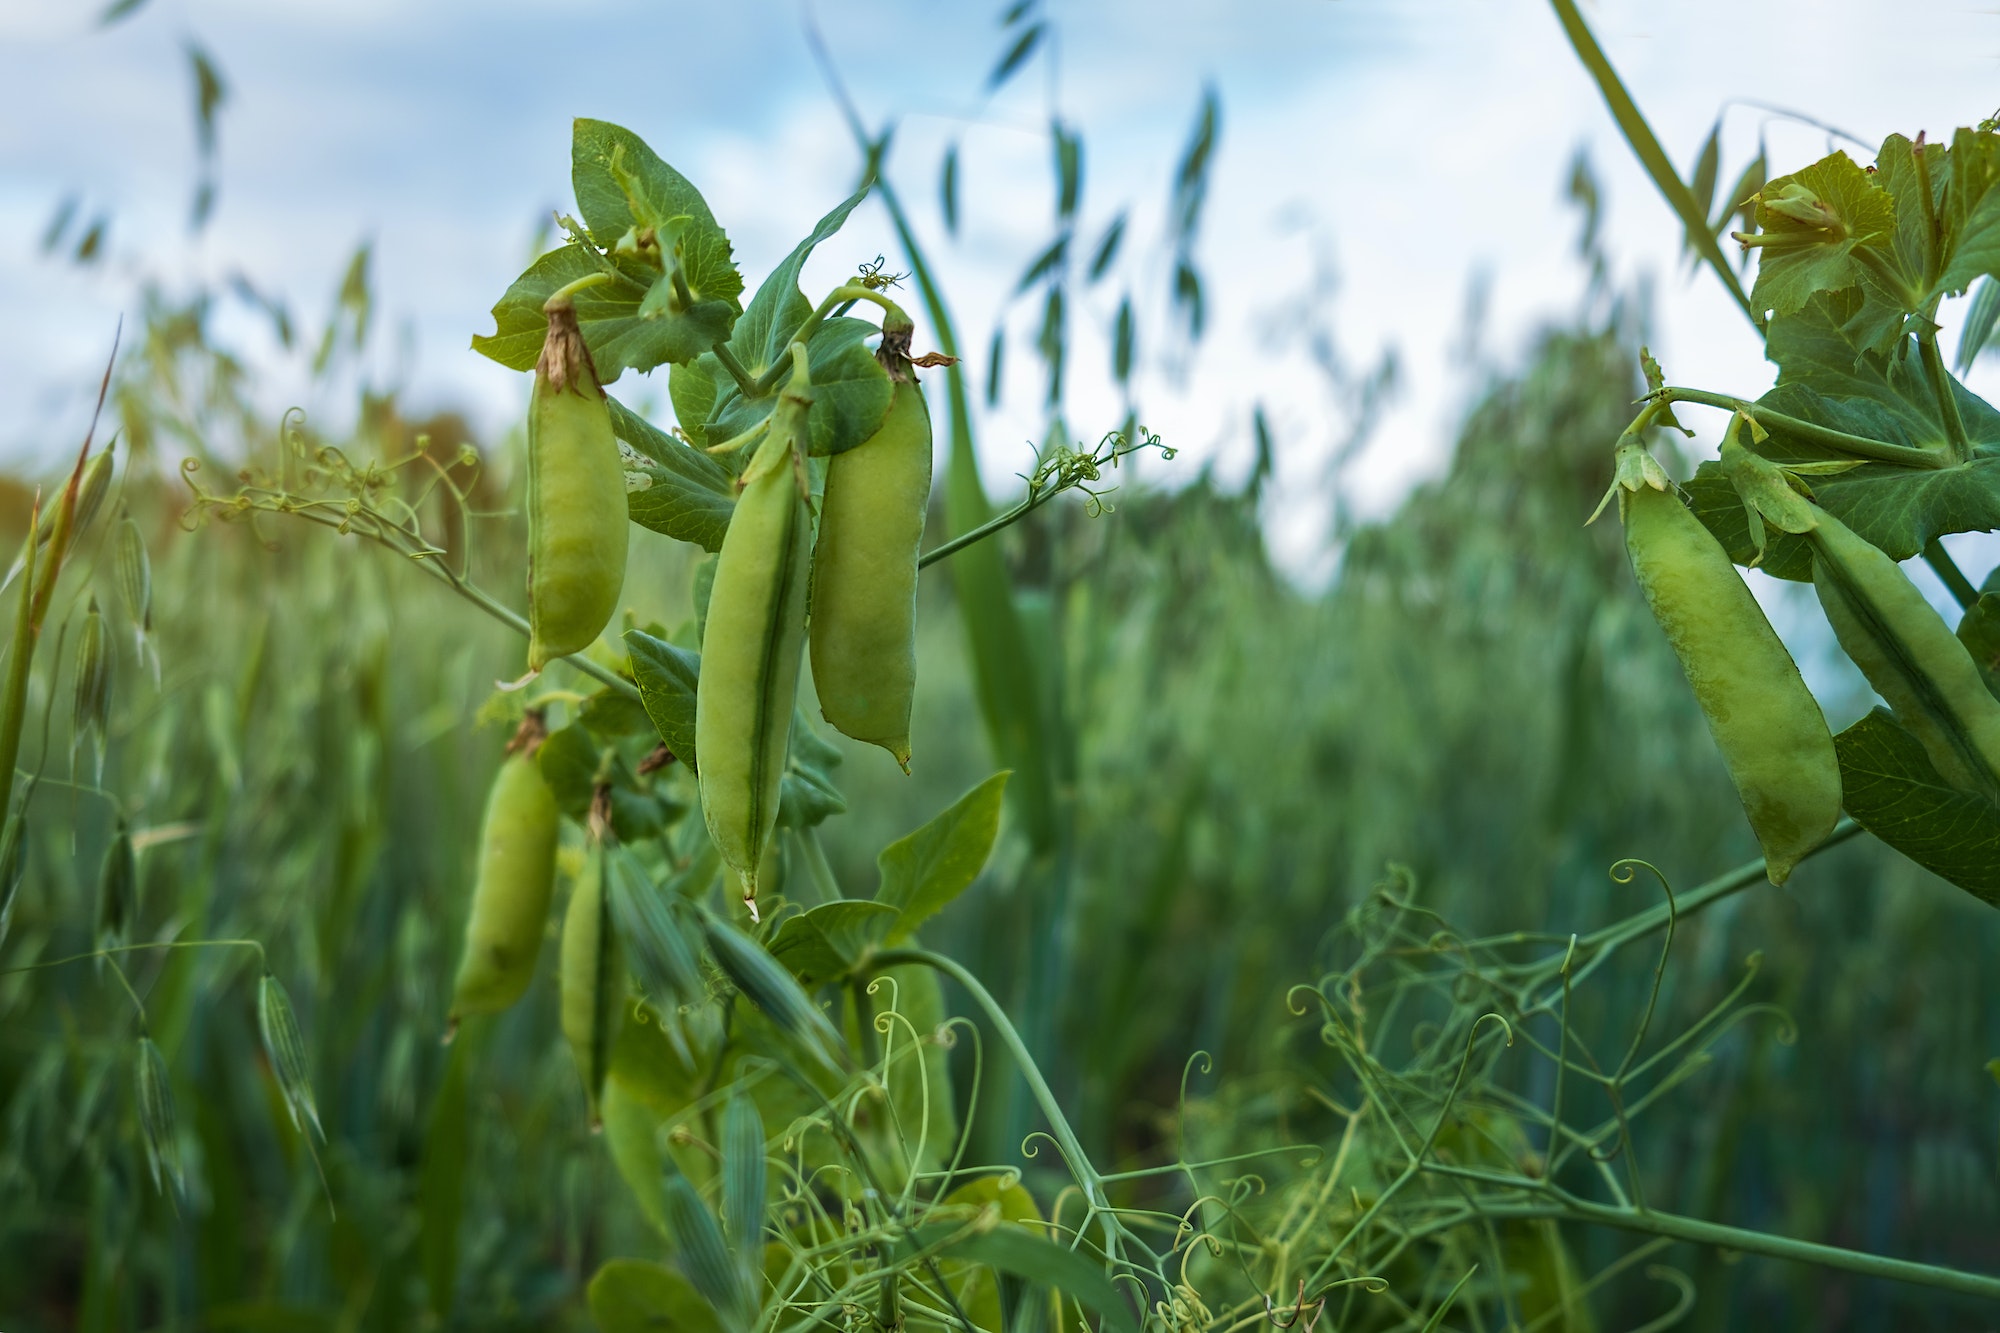 Bunches of green peas in a farmer's field.